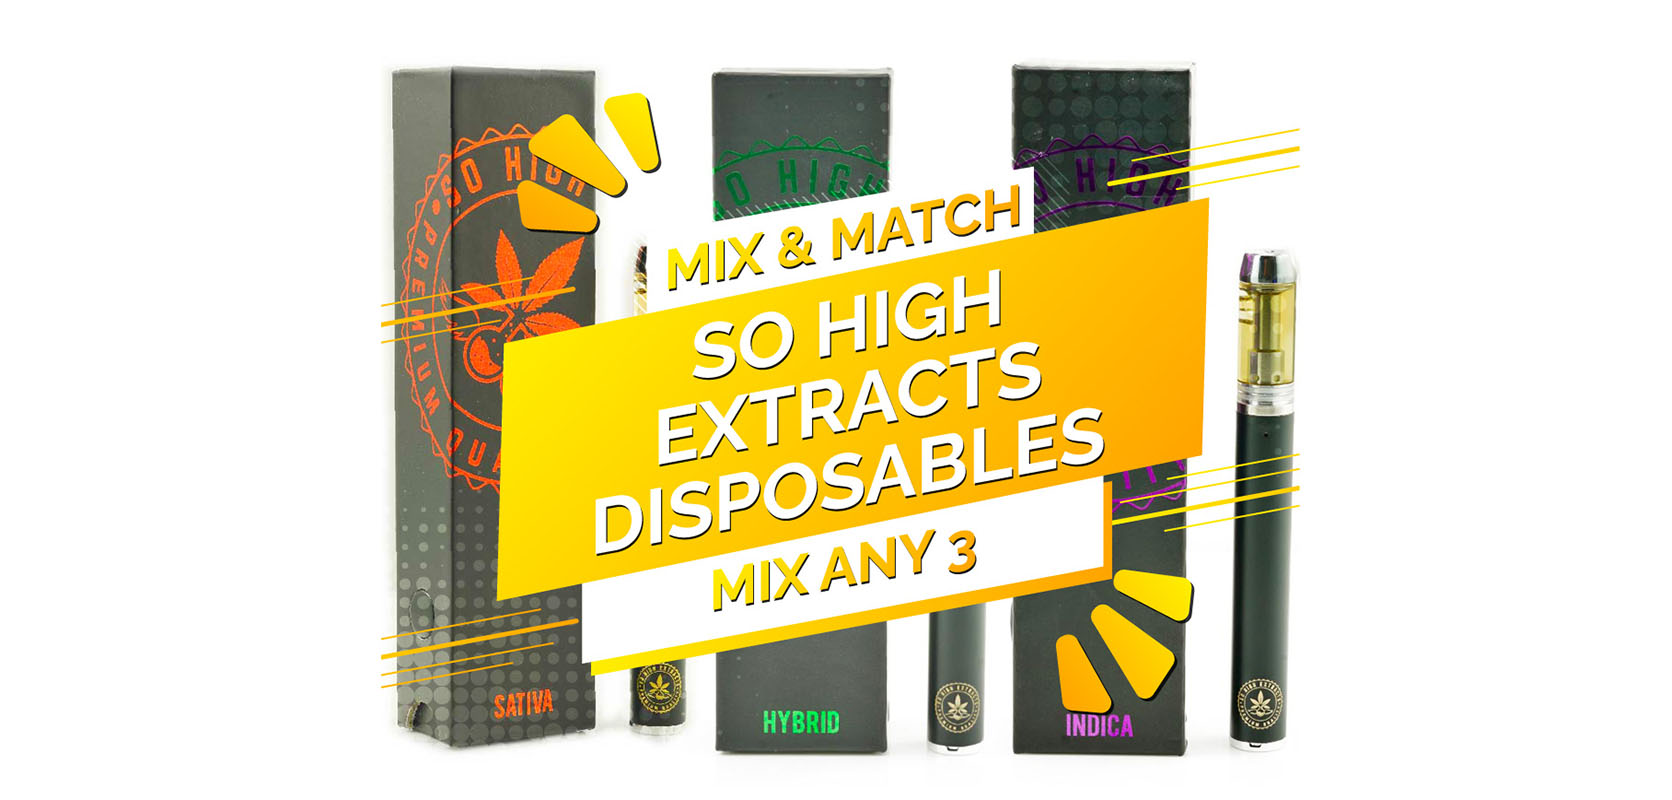 dab pens from so high extracts for sale at low price bud mail order marijuana online dispensary.